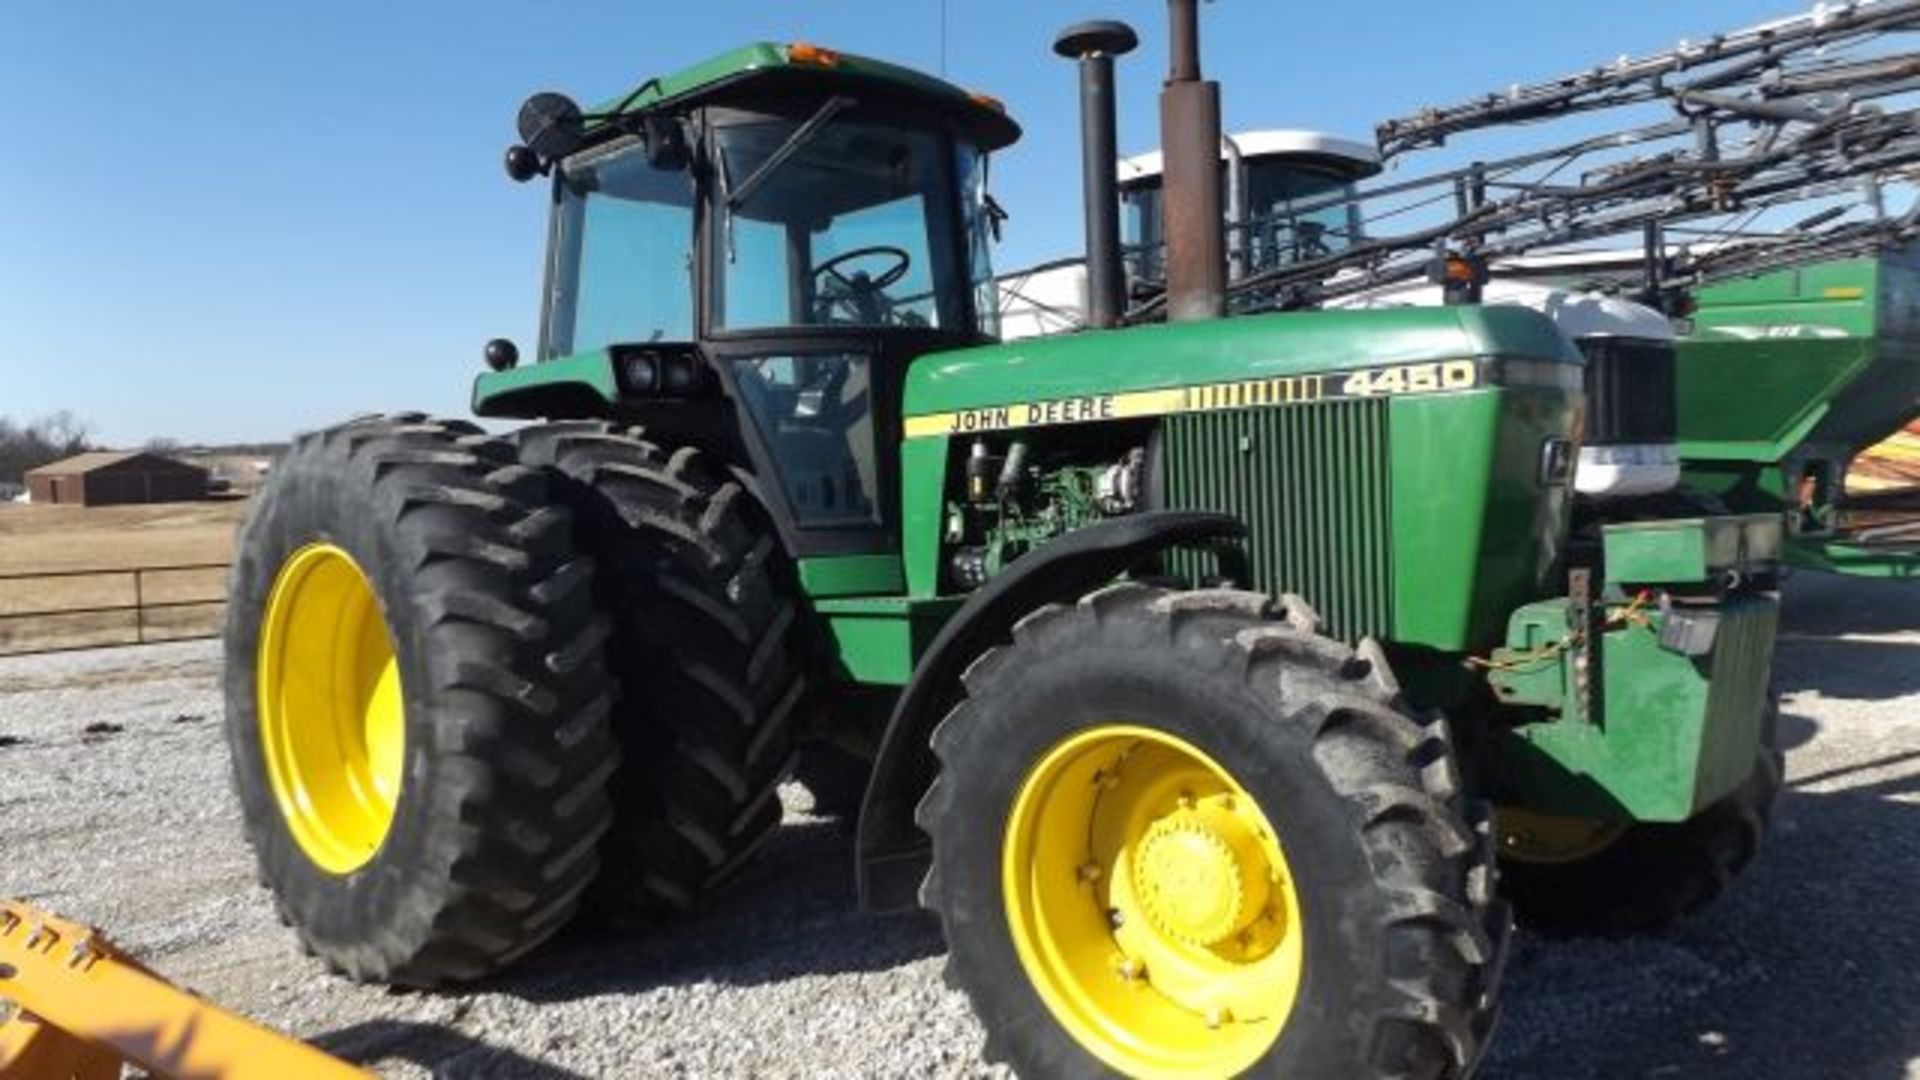 JD 4450 Tractor MFWD, 20.8 x 38 Duals,Powershift, Quick Hitch, 3 Remotes,